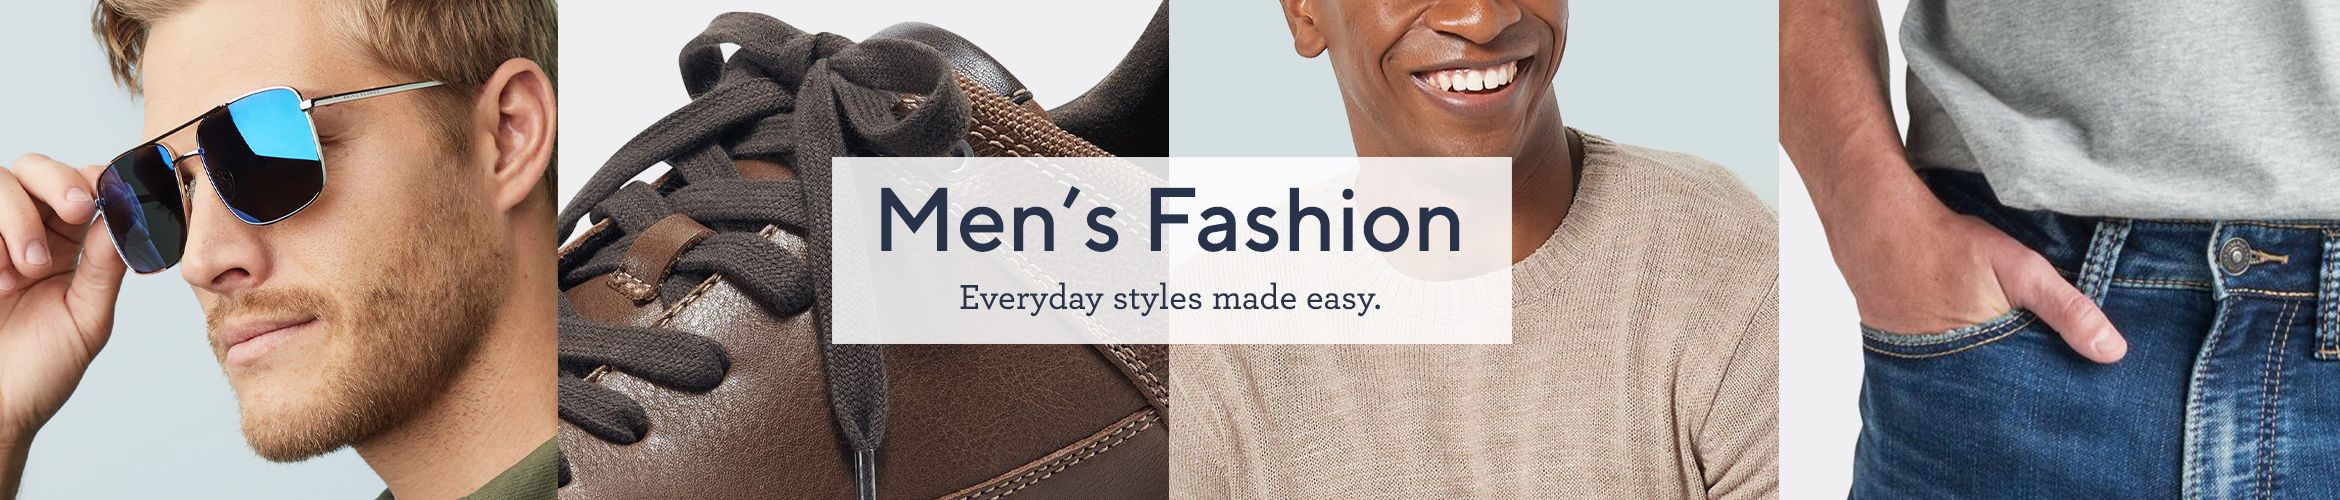 Men's Fashion.  Everyday styles made easy.